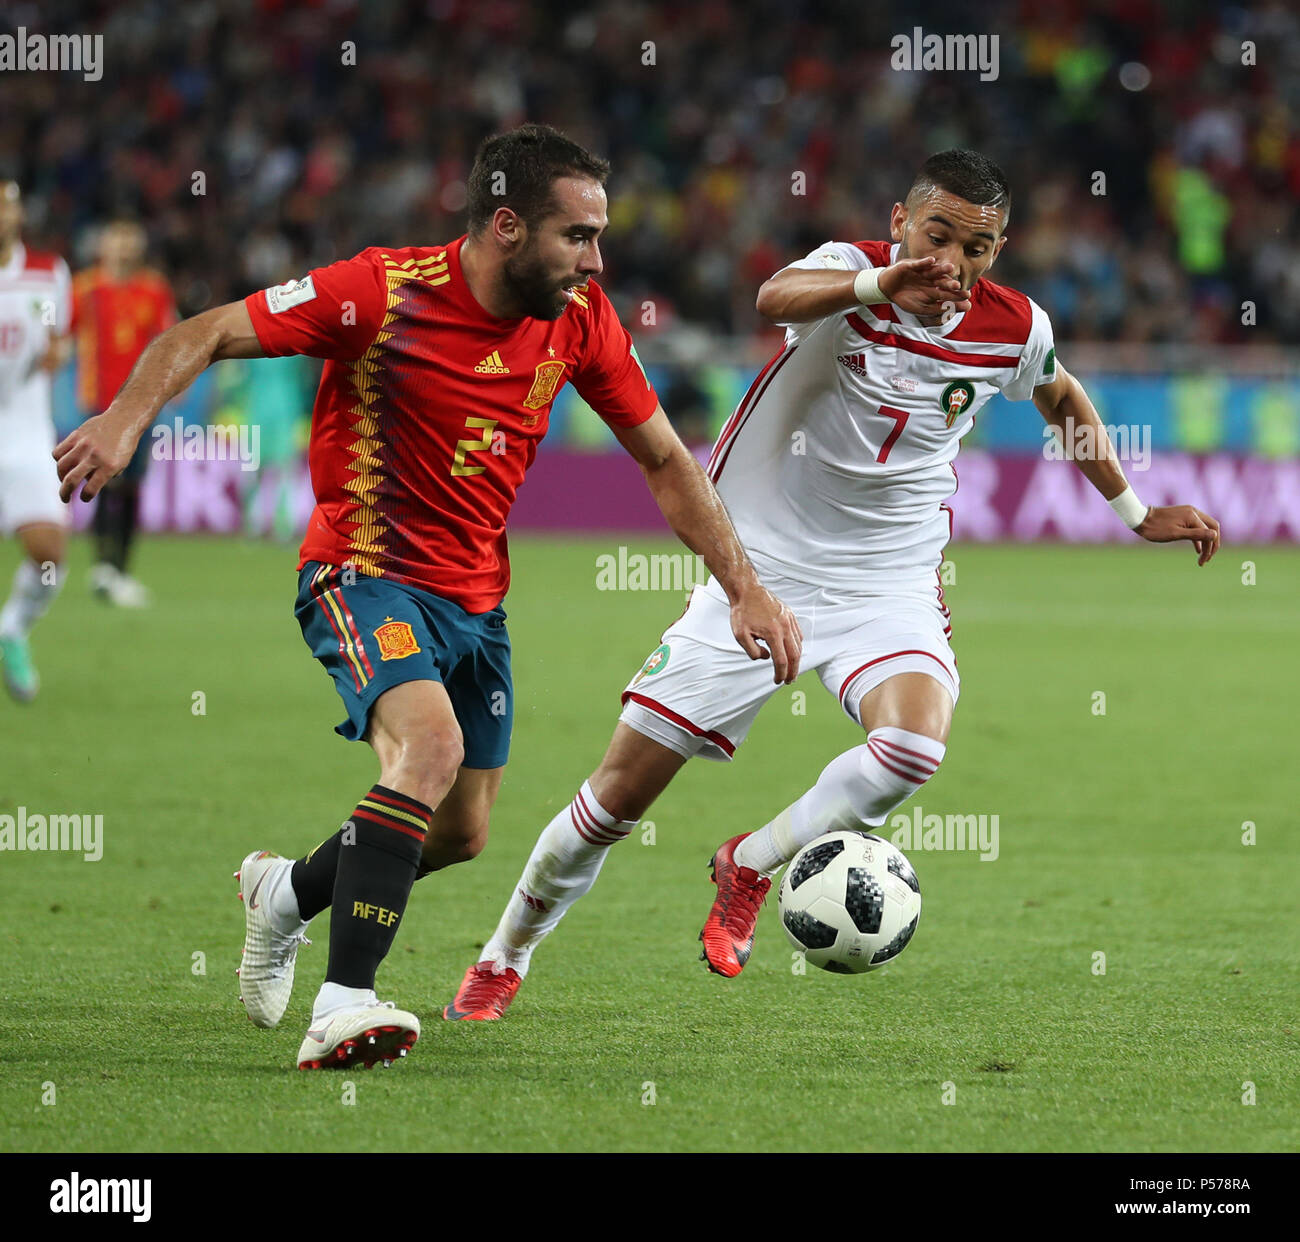 Kaliningrad, Russia. 25th June, 2018. Dani Carvajal (L) of Spain vies with Hakim Ziyach of Morocco during the 2018 FIFA World Cup Group B match between Spain and Morocco in Kaliningrad, Russia, June 25, 2018. Credit: Lu Jinbo/Xinhua/Alamy Live News Stock Photo